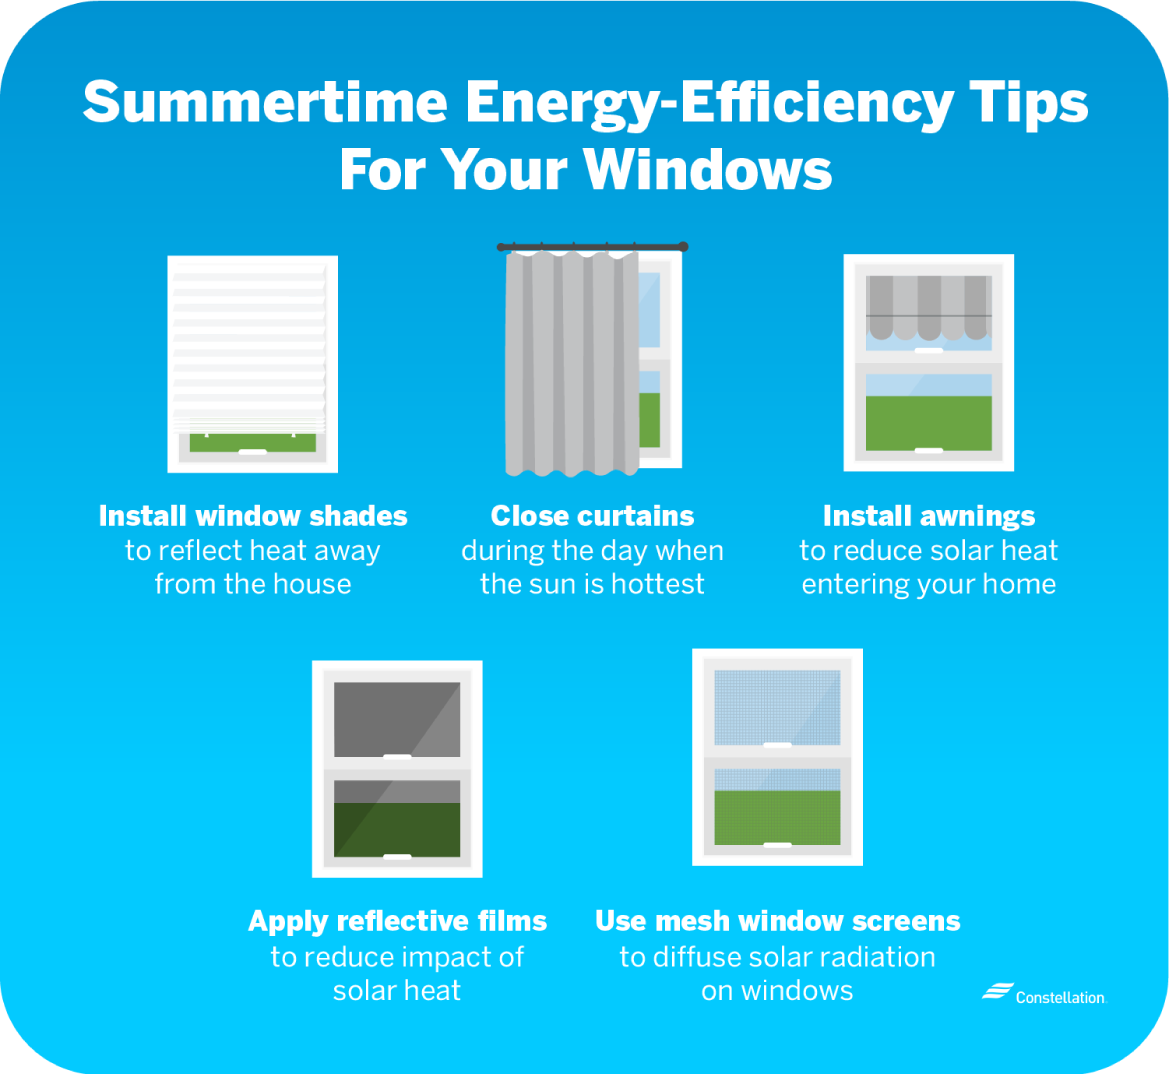 Energy tips for summer include installing window shades and awnings, closing curtains, and applying reflective films.